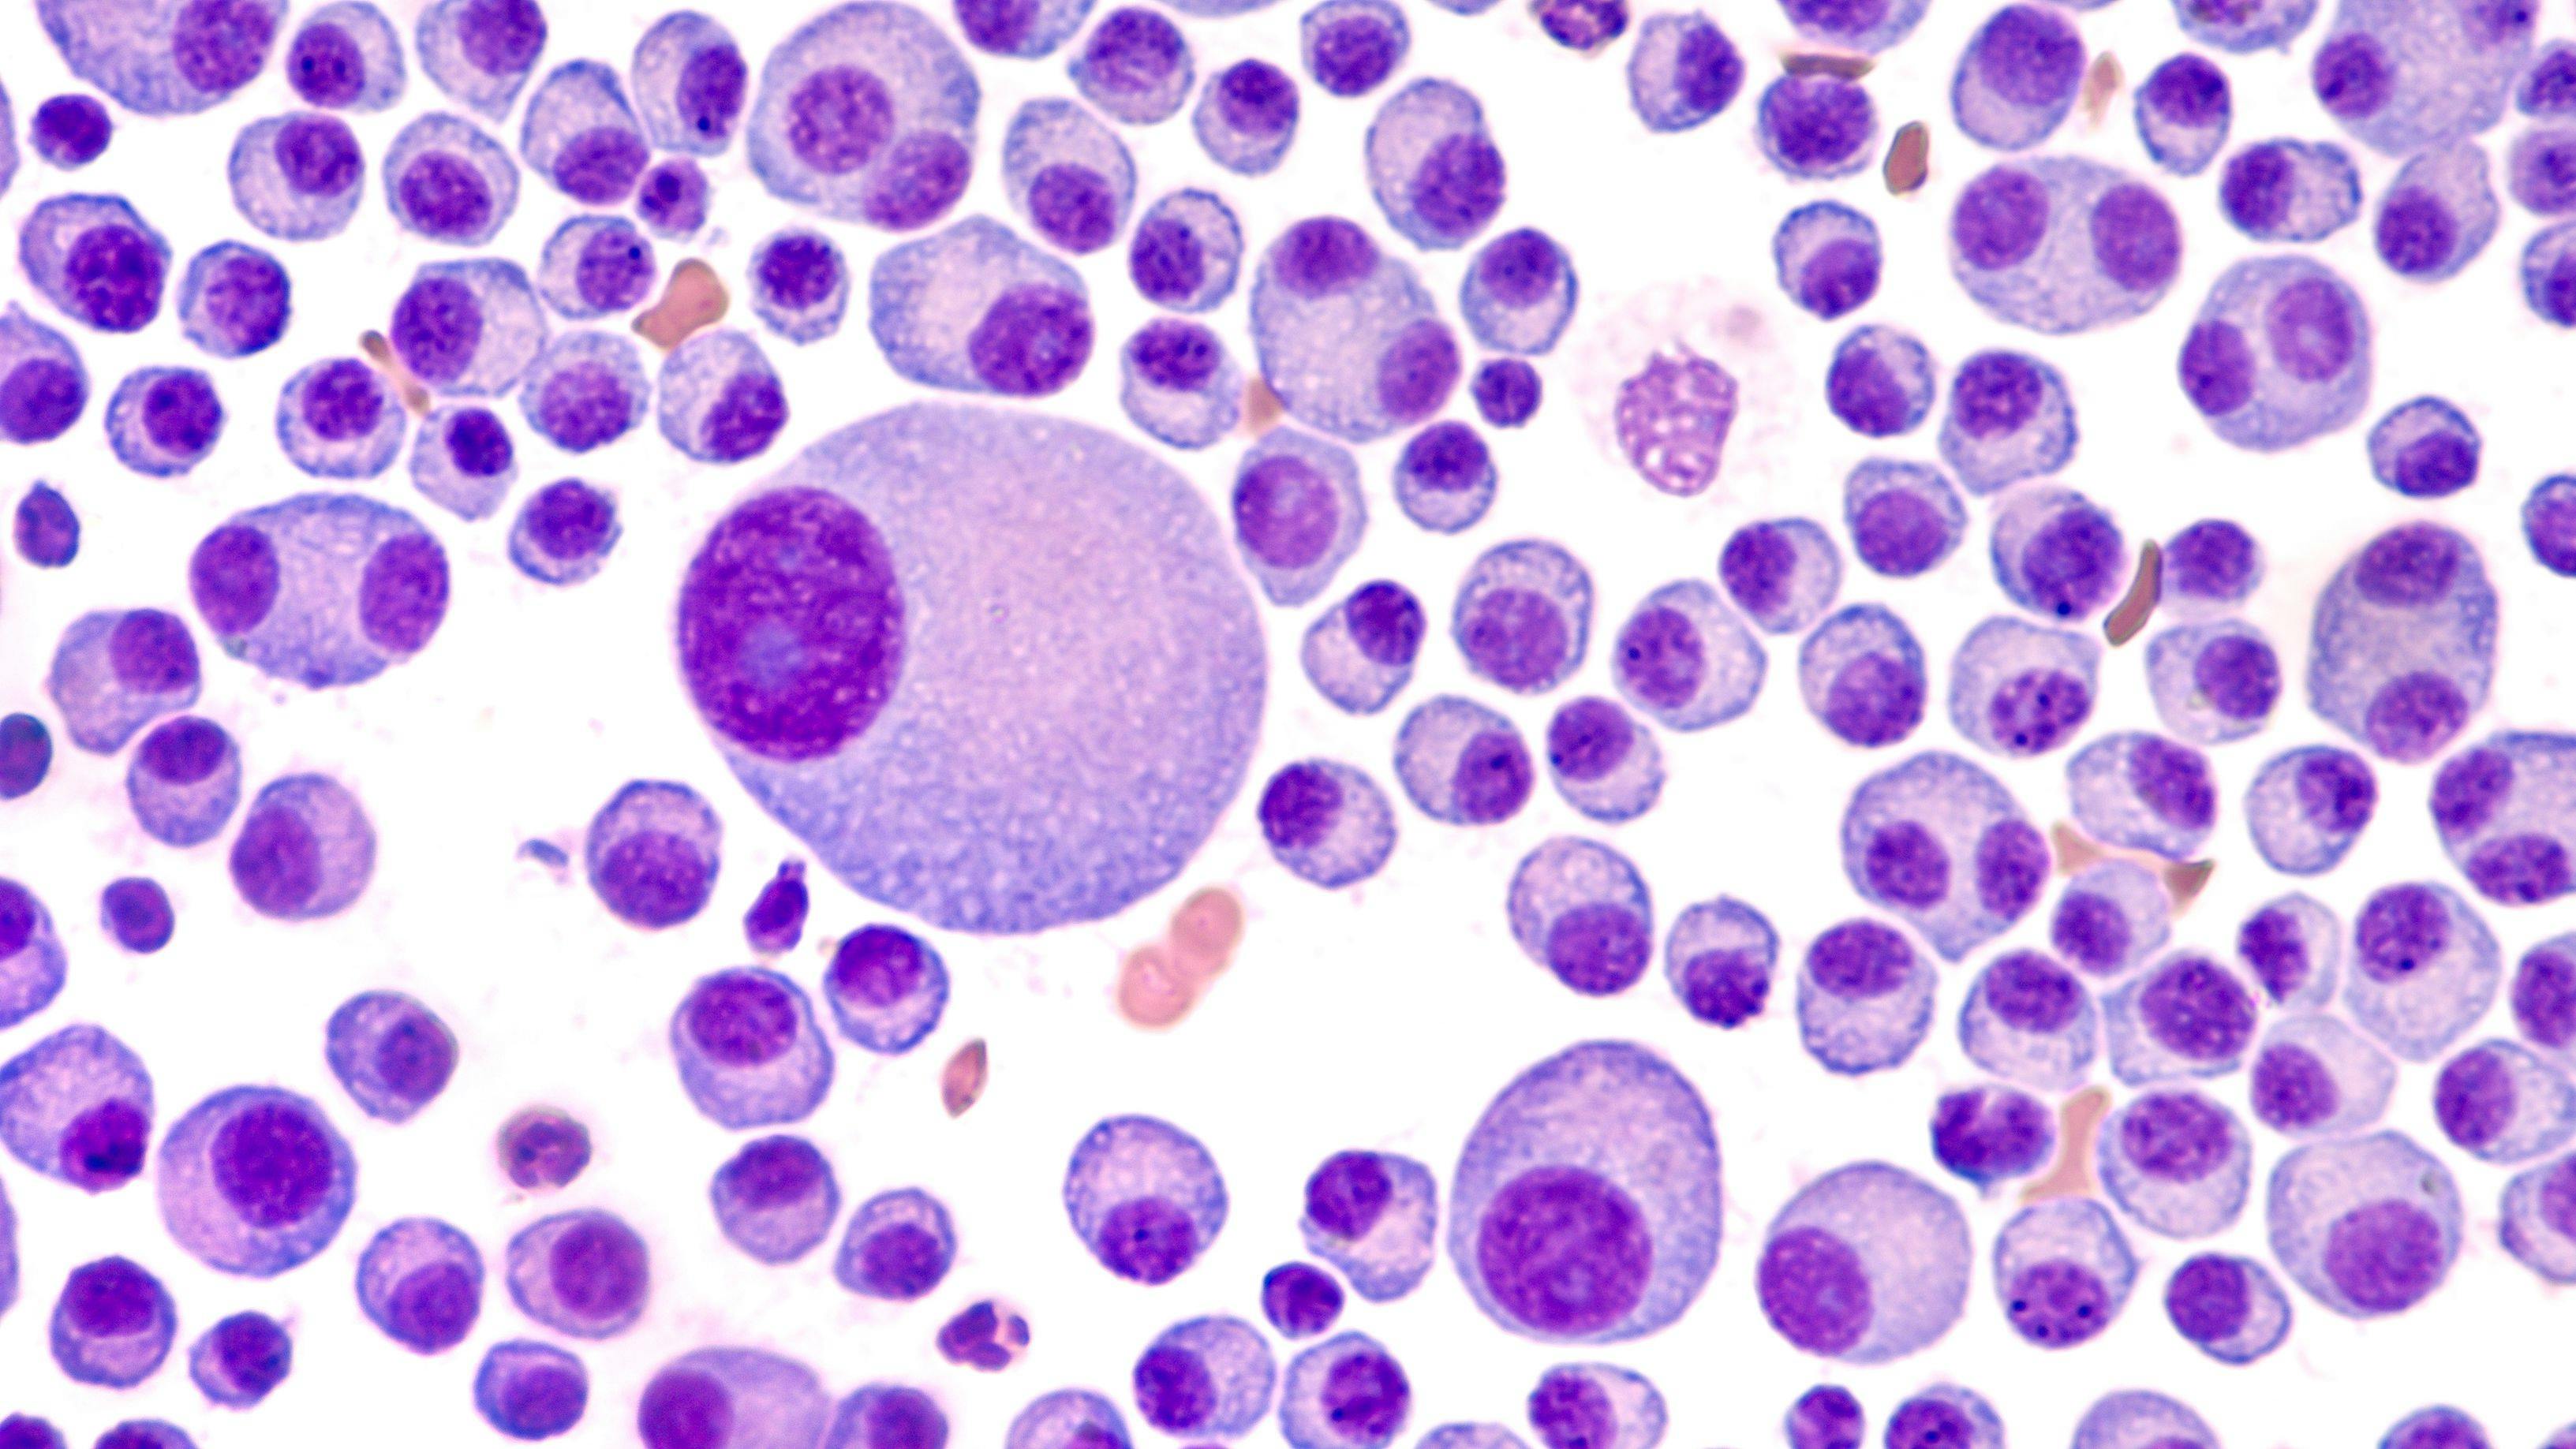 EU CHMP Gives Positive Opinion for Ide-Cel's Use in Multiple Myeloma